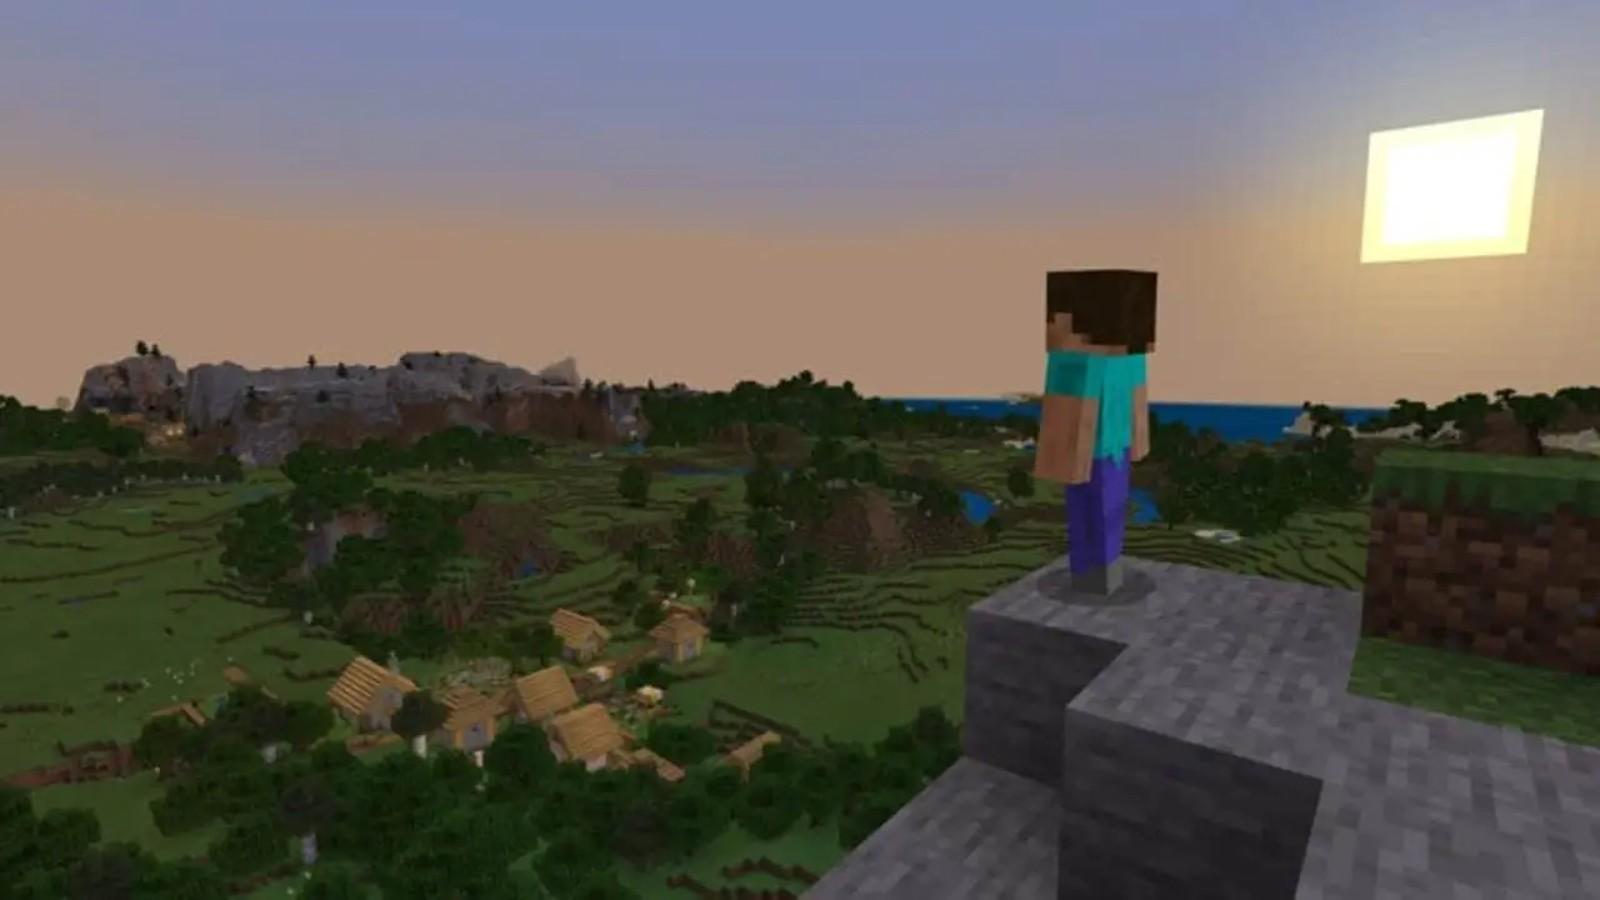 An image from Minecraft featuring the main avatar and a landscape.